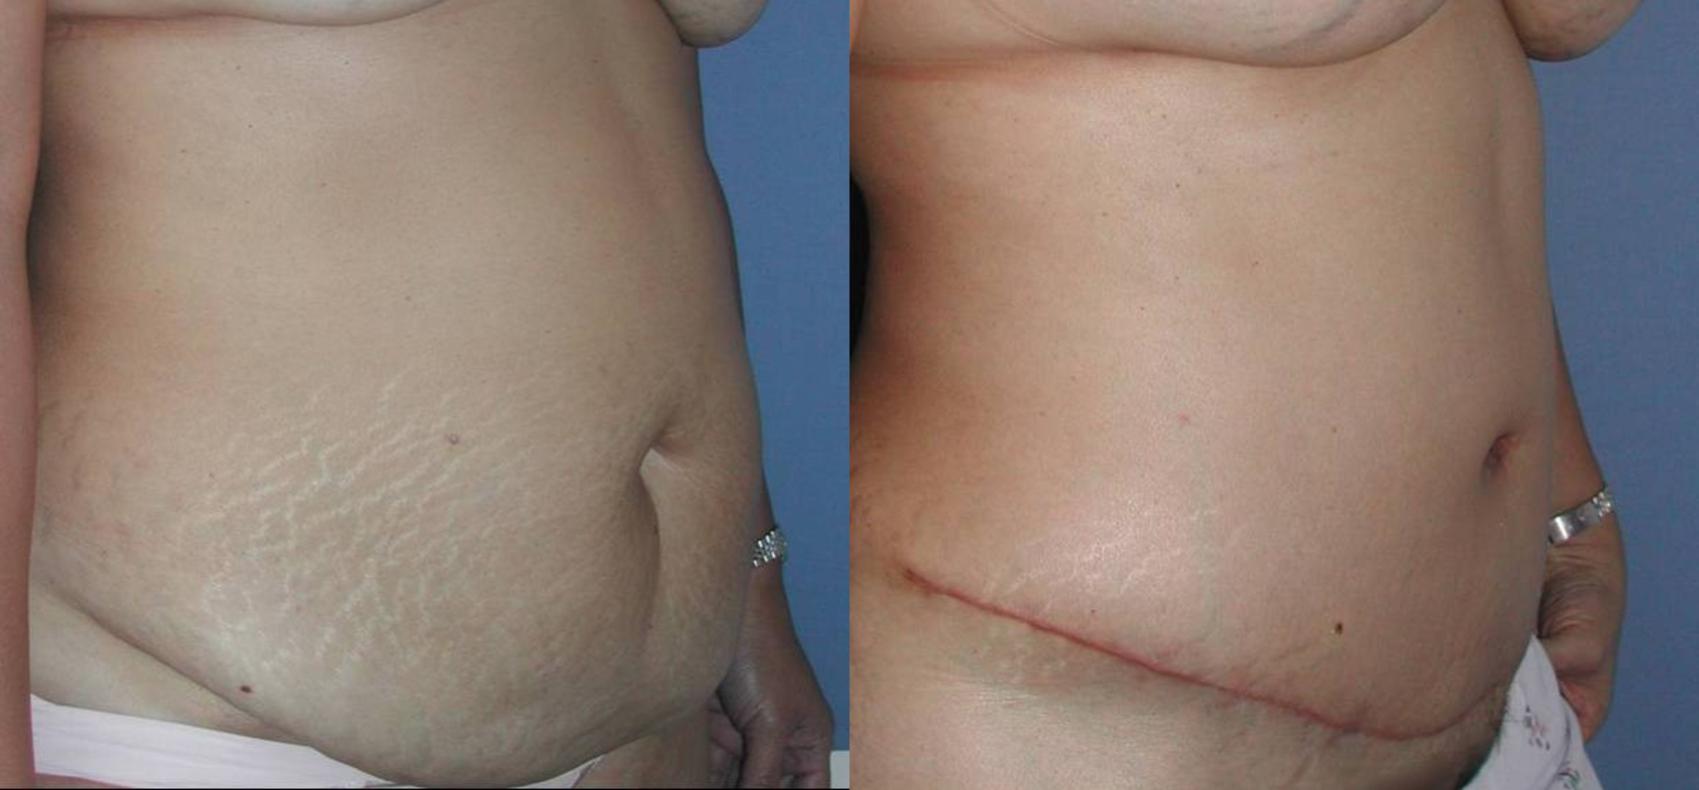 Tummy Tuck Before & After Photos Patient 33 San Francisco, CA Kaiser Permanente Cosmetic